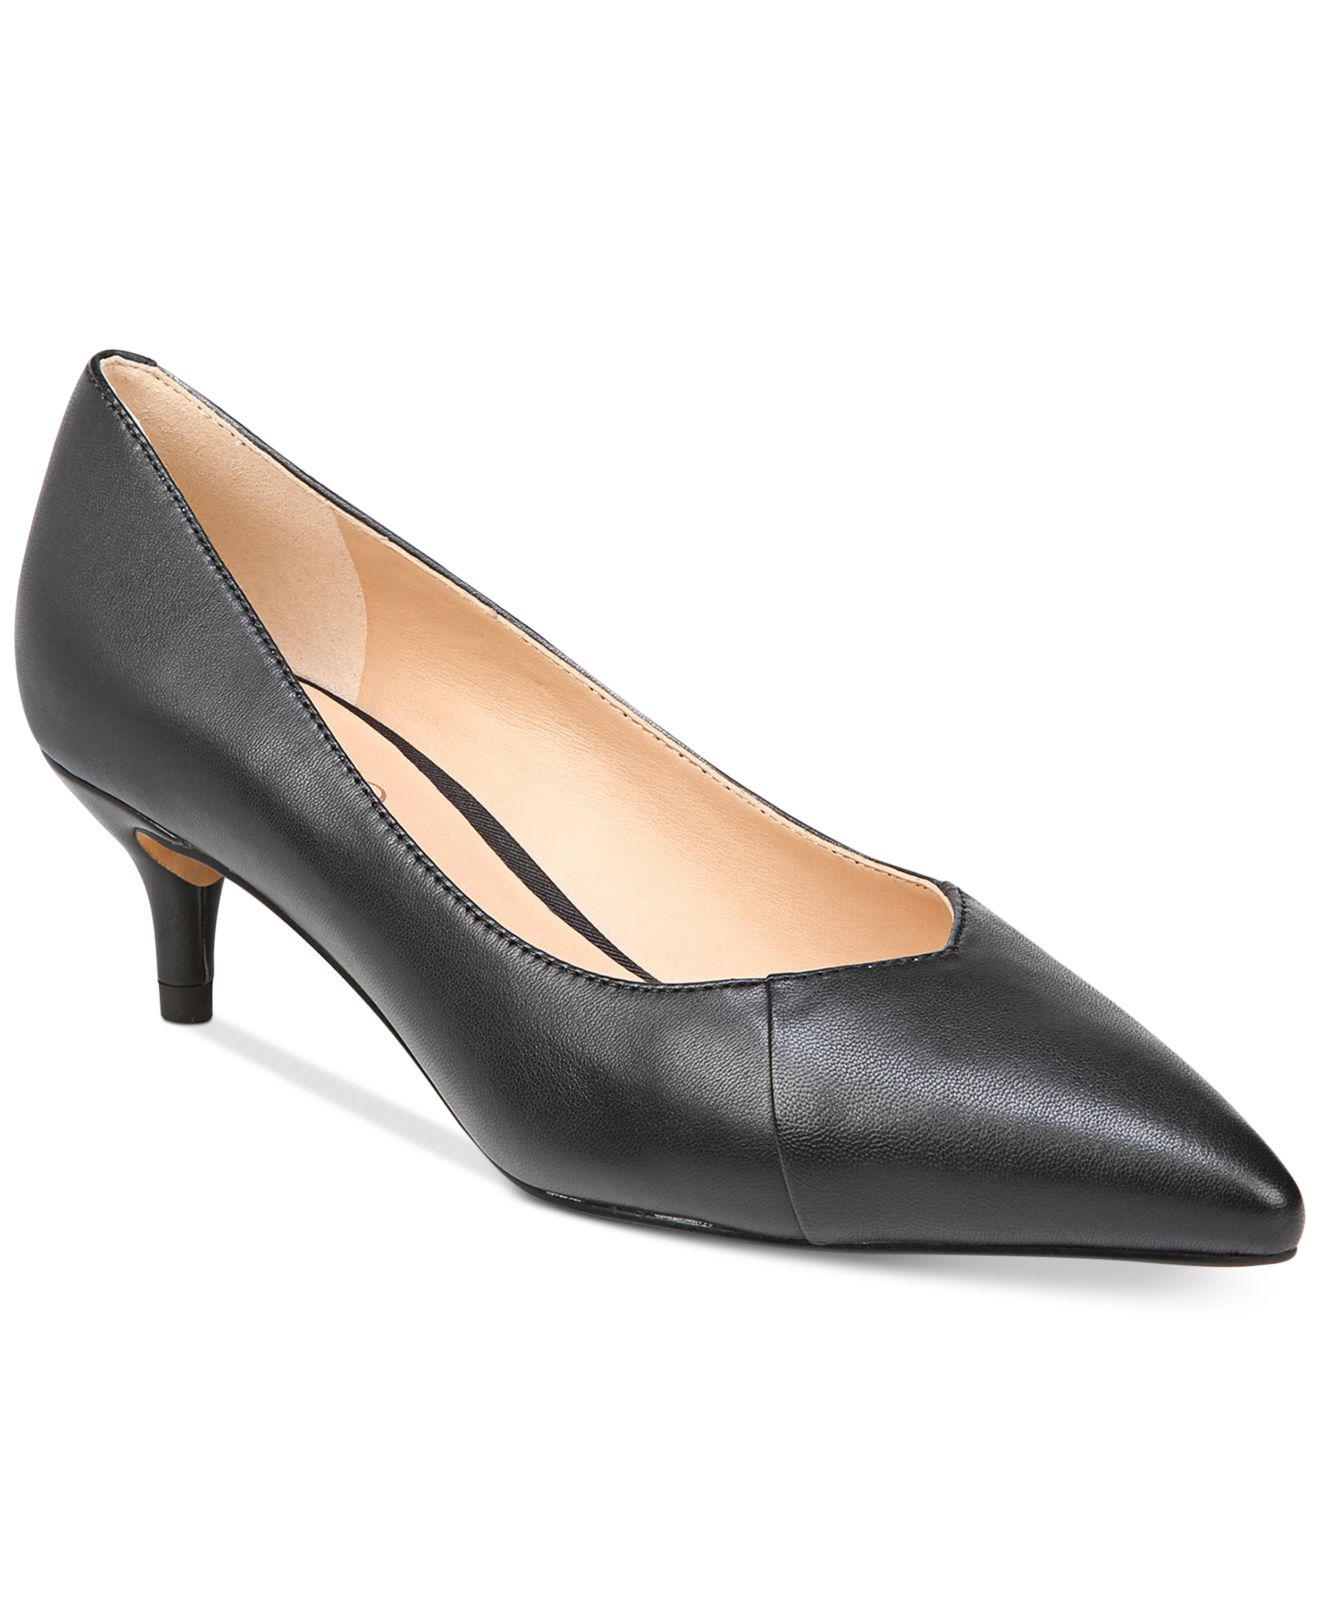 Franco Sarto Leather Donnie Pumps in Black - Lyst